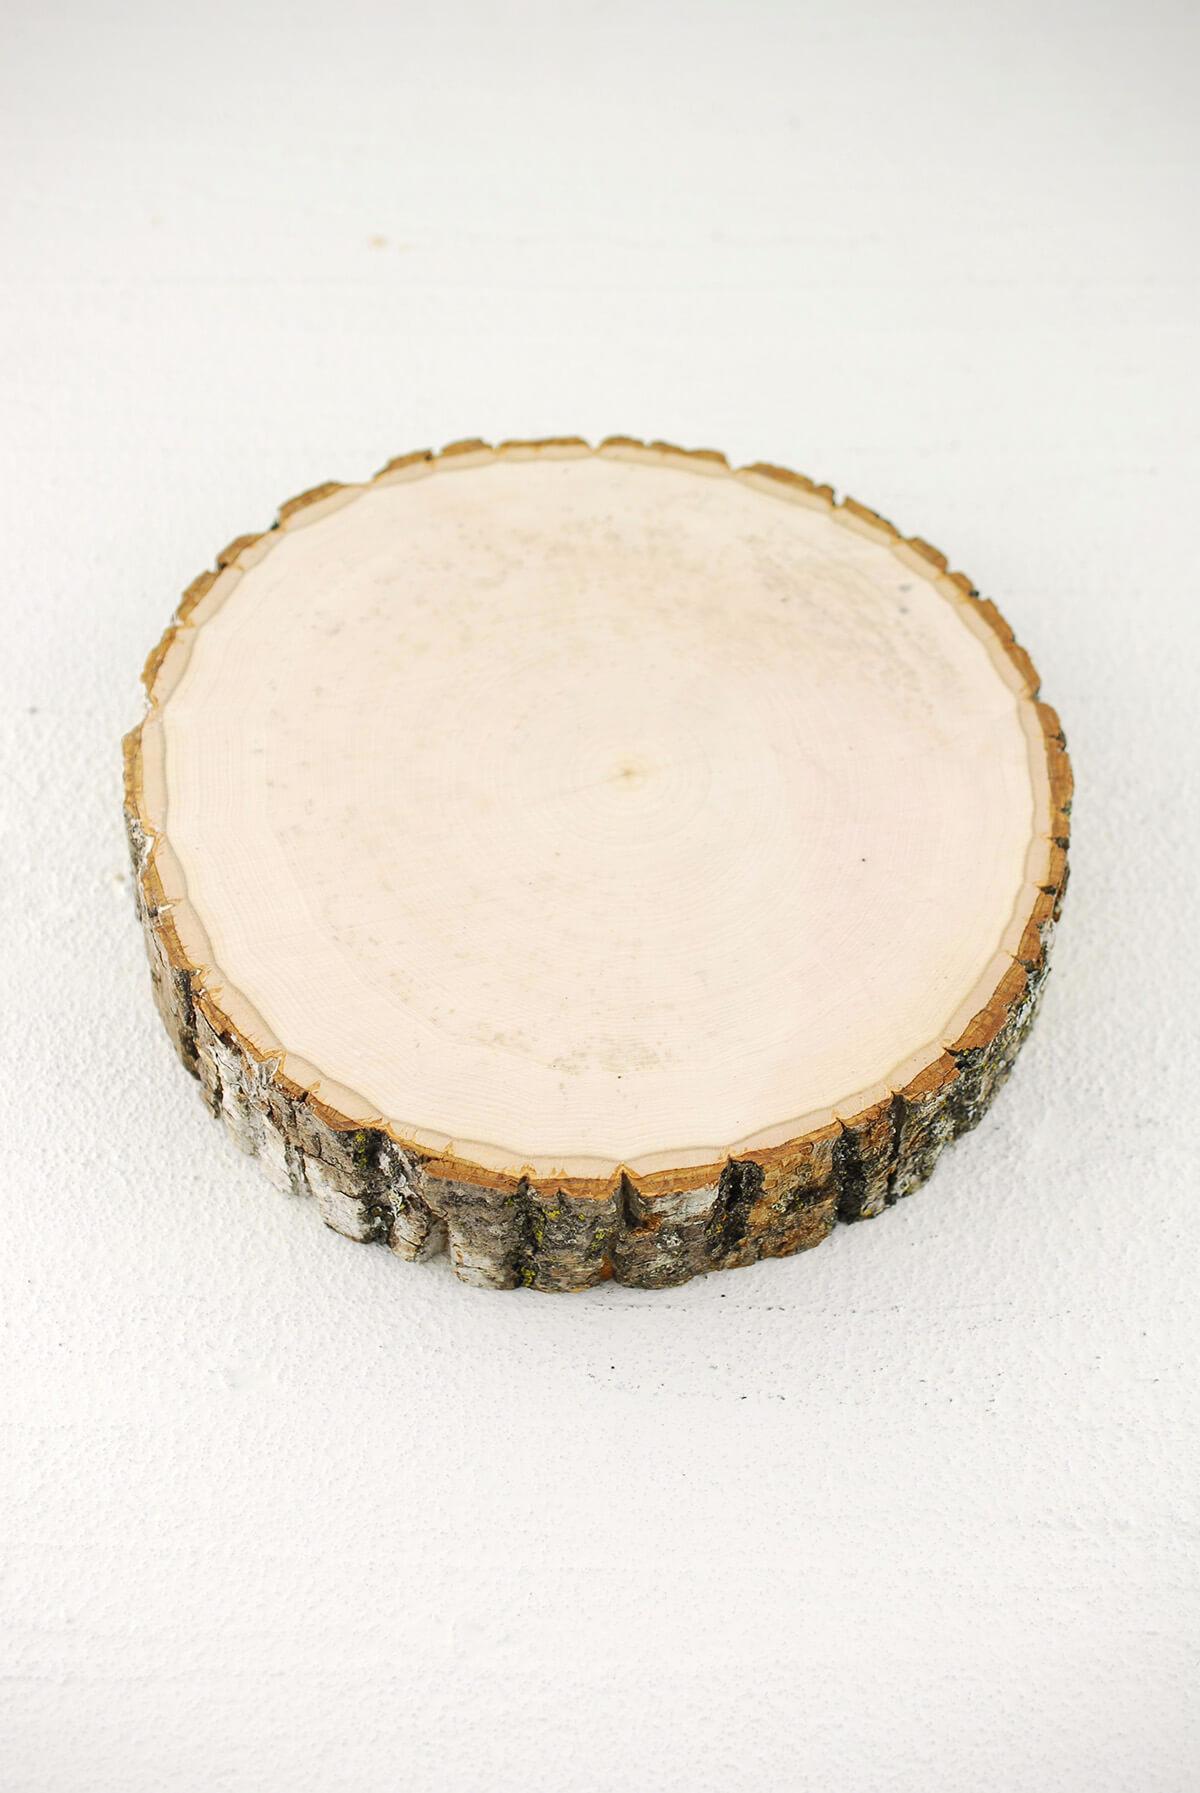 Pack of 5-12 Inch Wood Round, Wood Slices 12 Inch Diameter, Wood